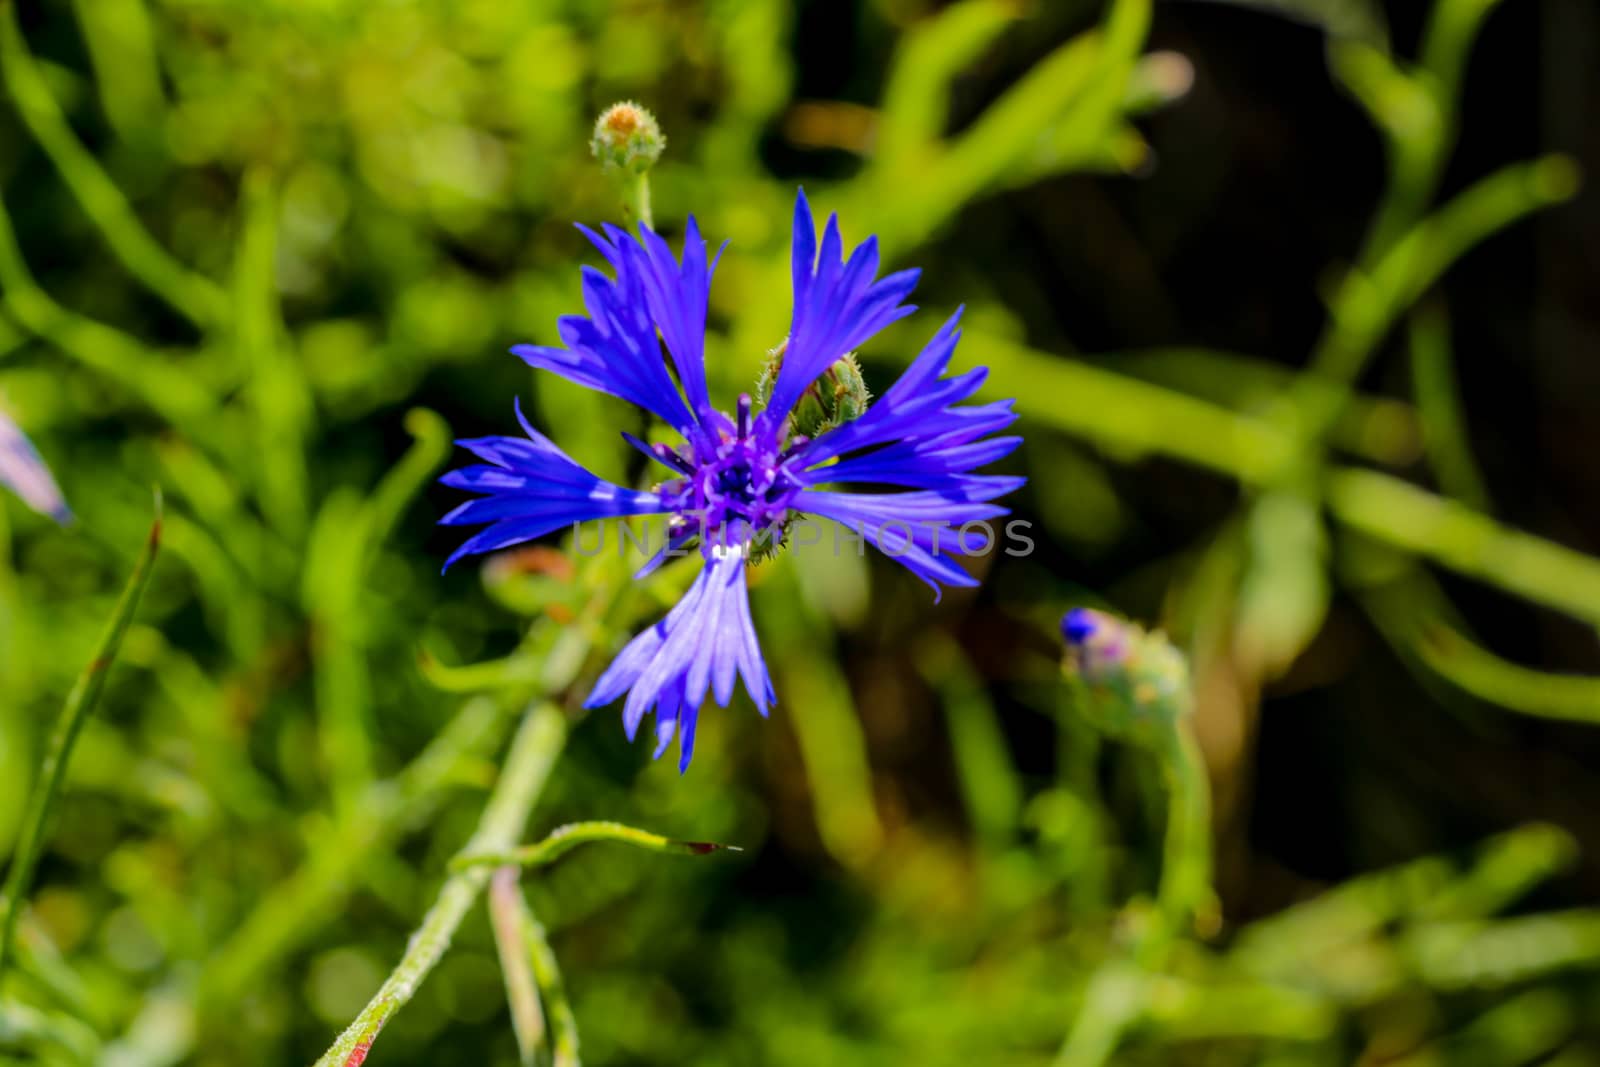 Knapweed blue flower in the garden green, close up. by kip02kas